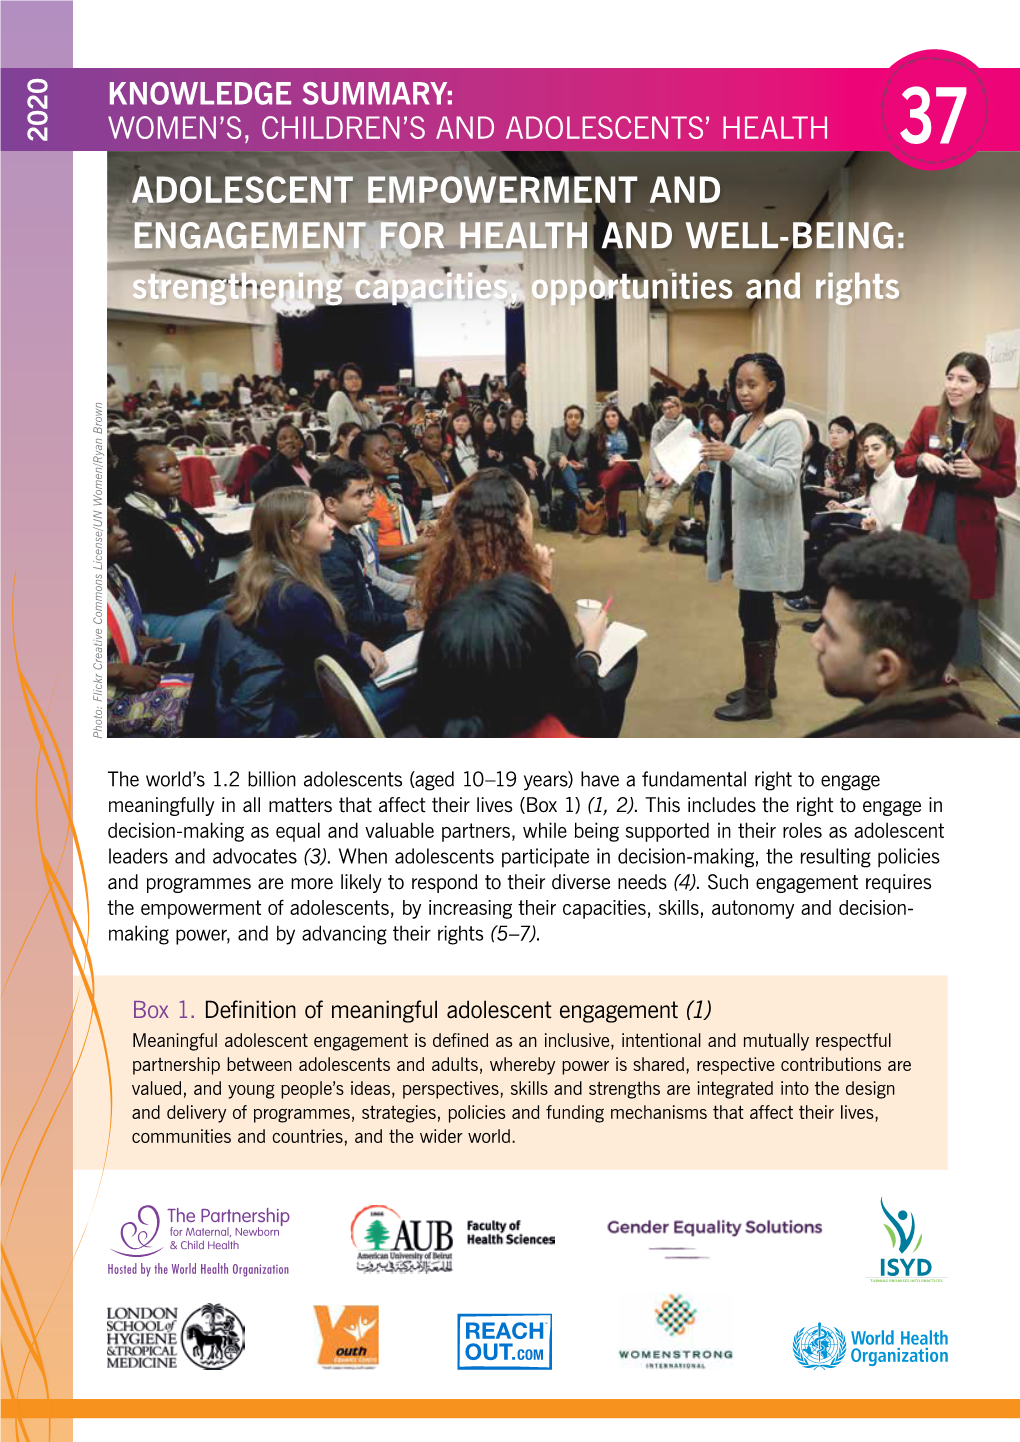 Adolescent Empowerment and Engagement for Health